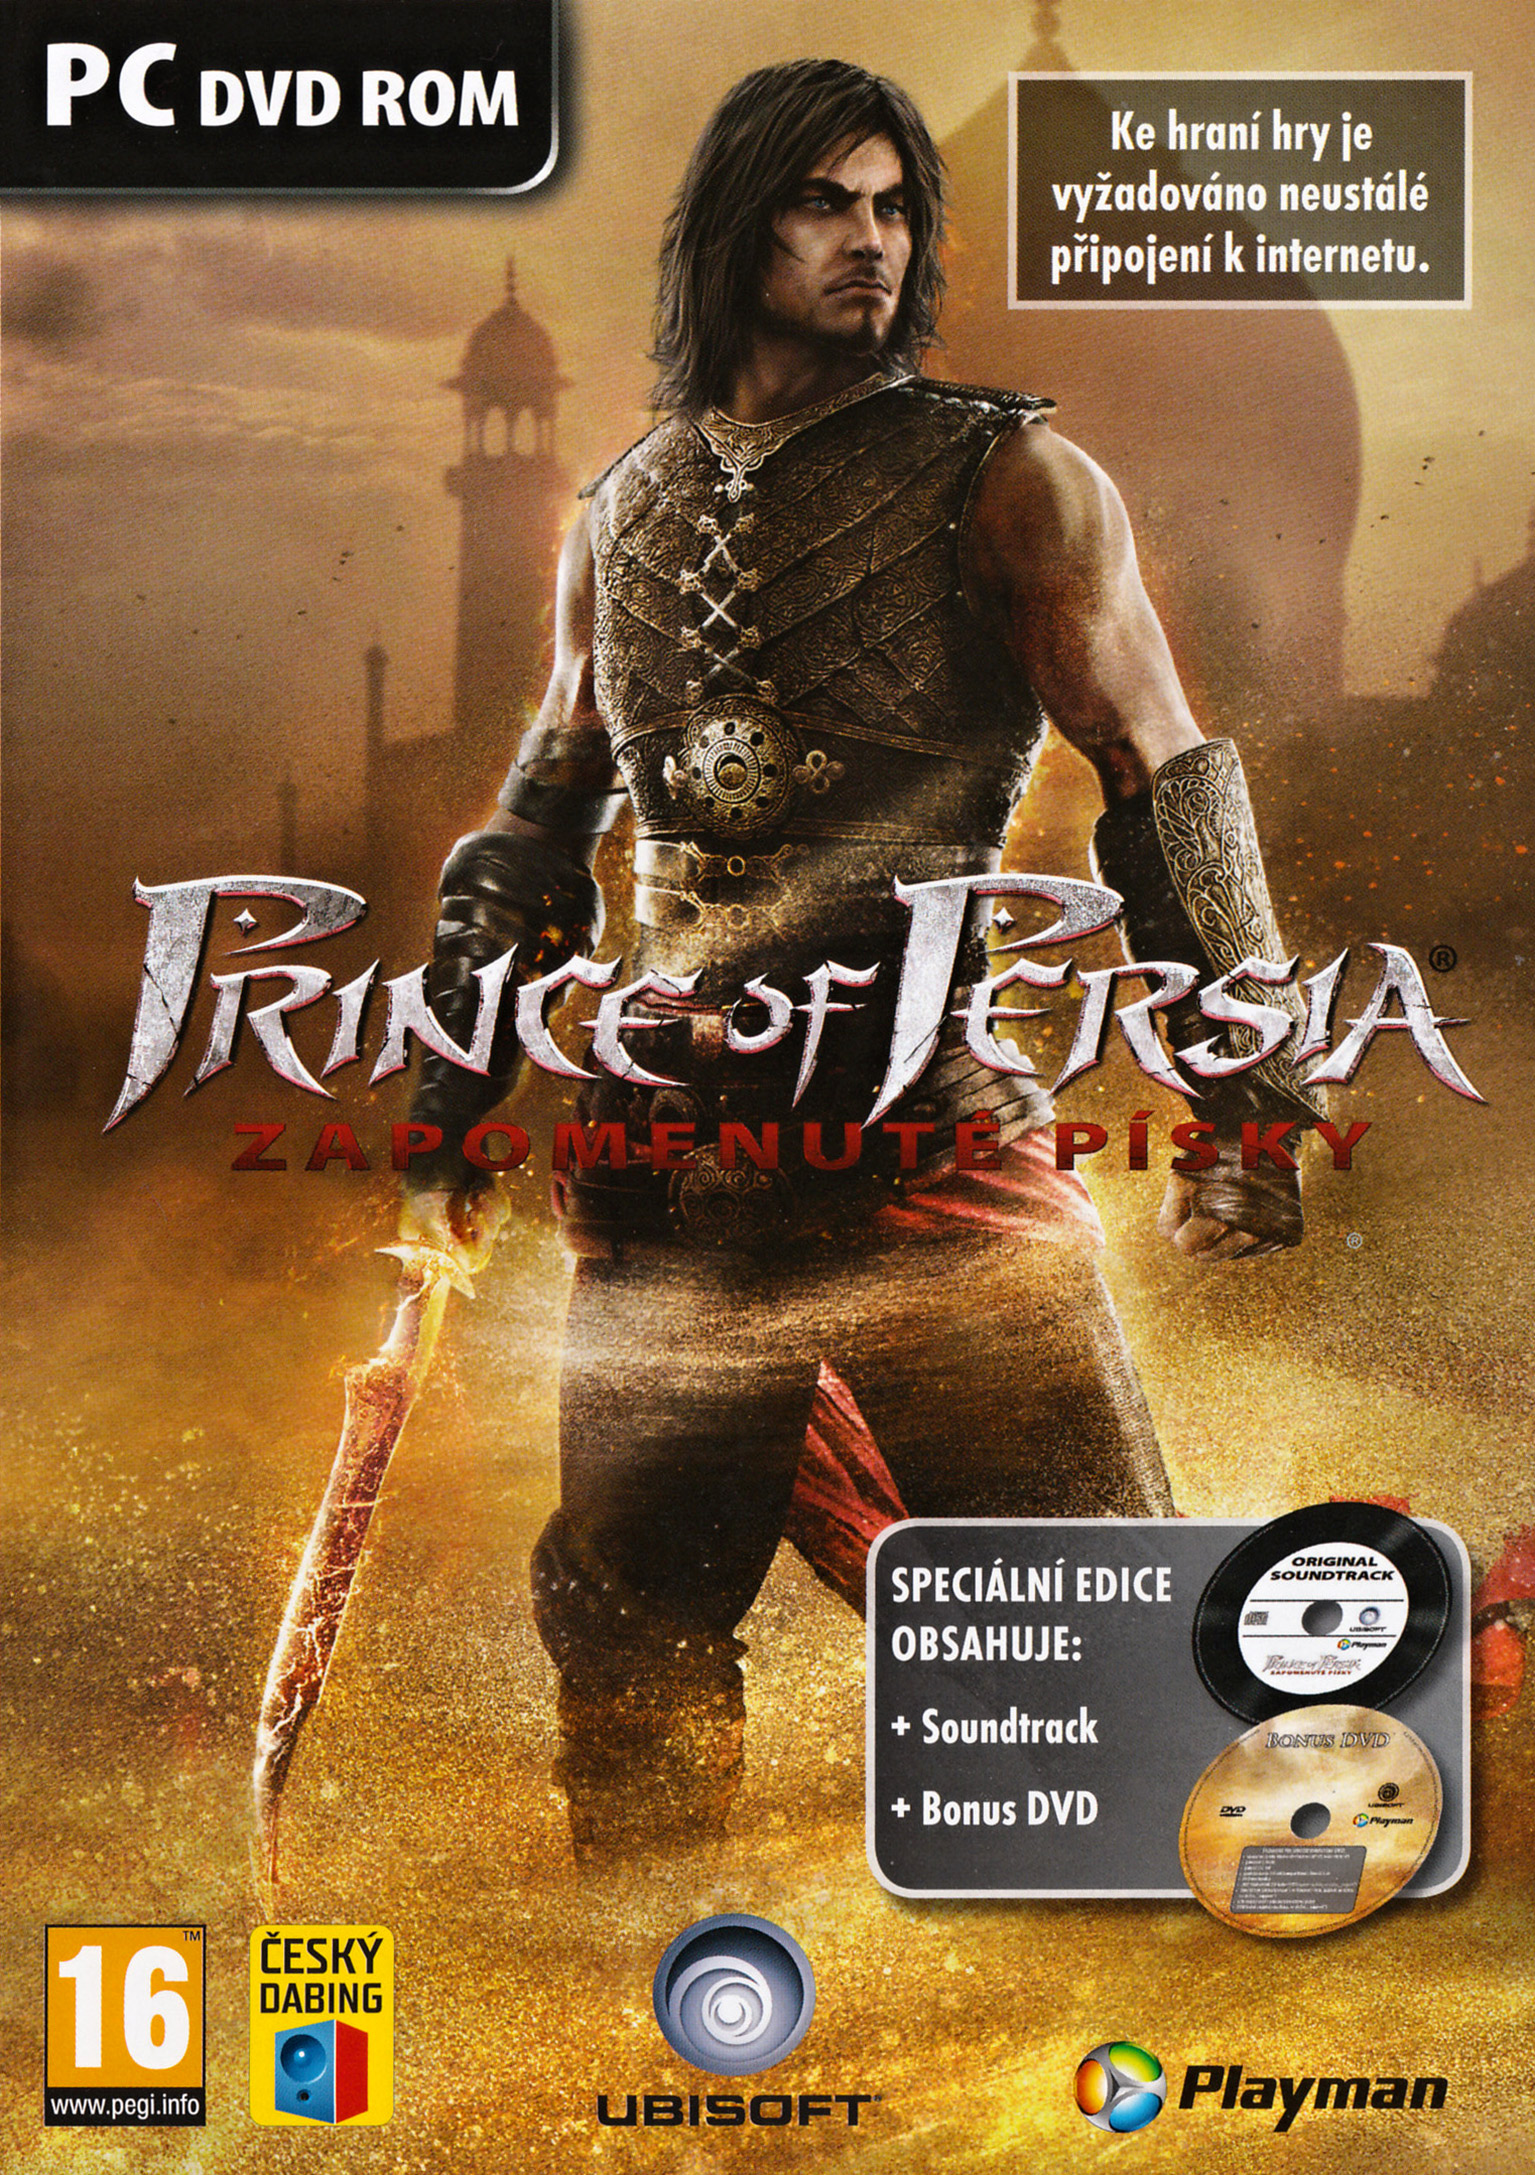 Prince of Persia: The Forgotten Sands - predn DVD obal